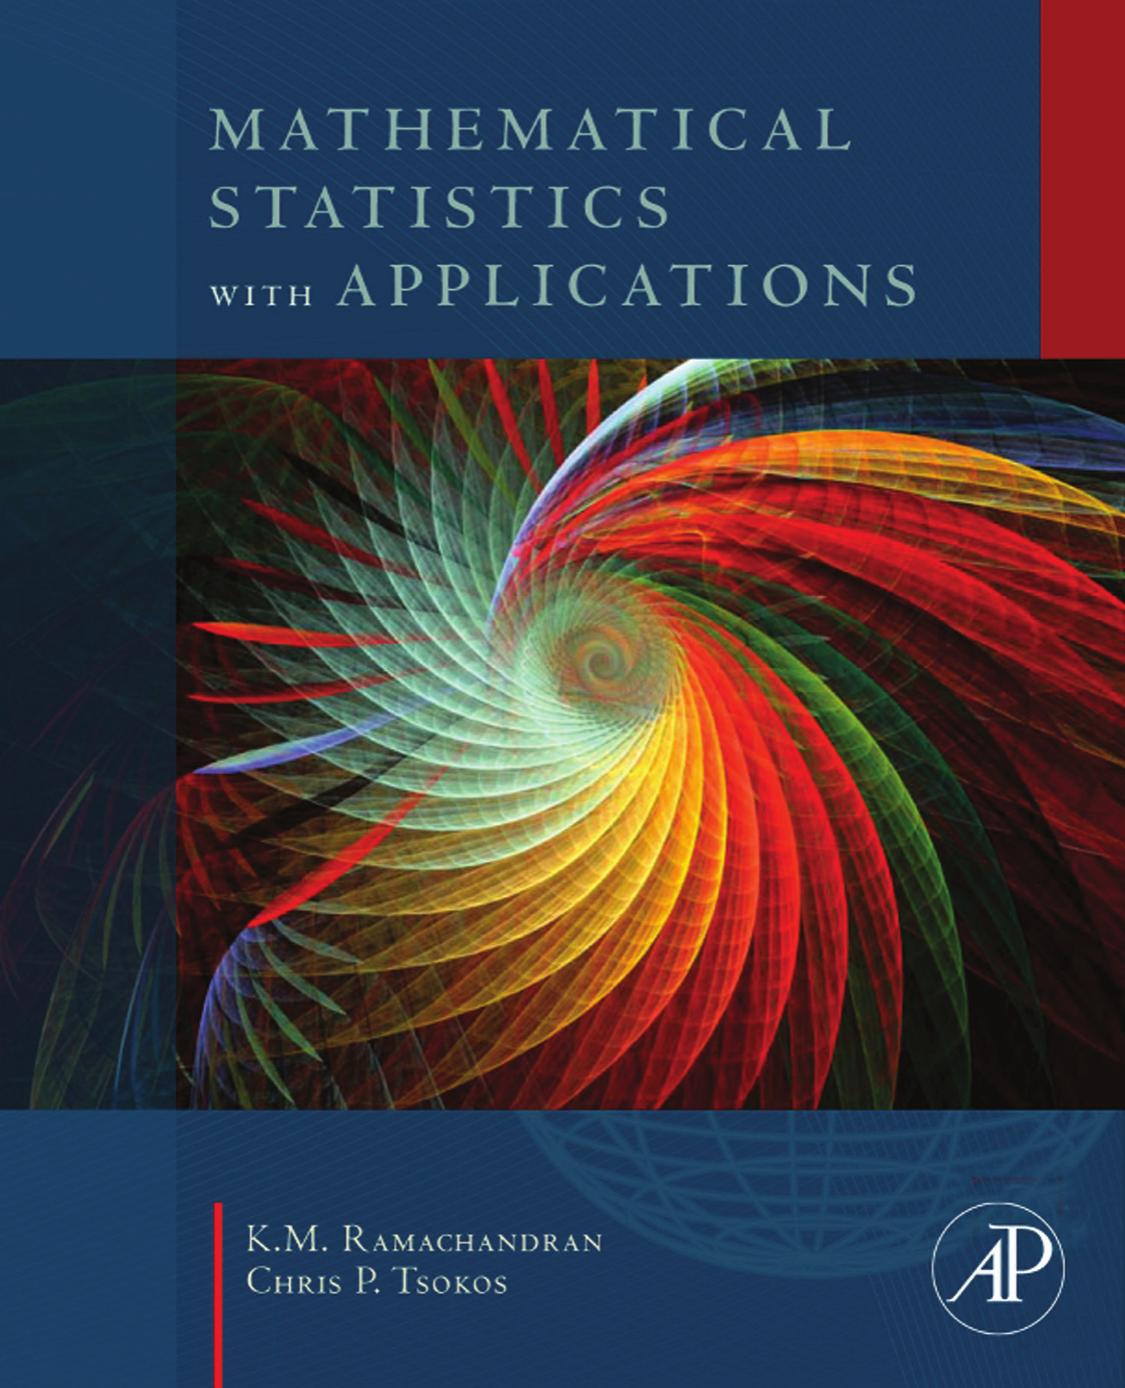 Mathematical Statistics With Applications.